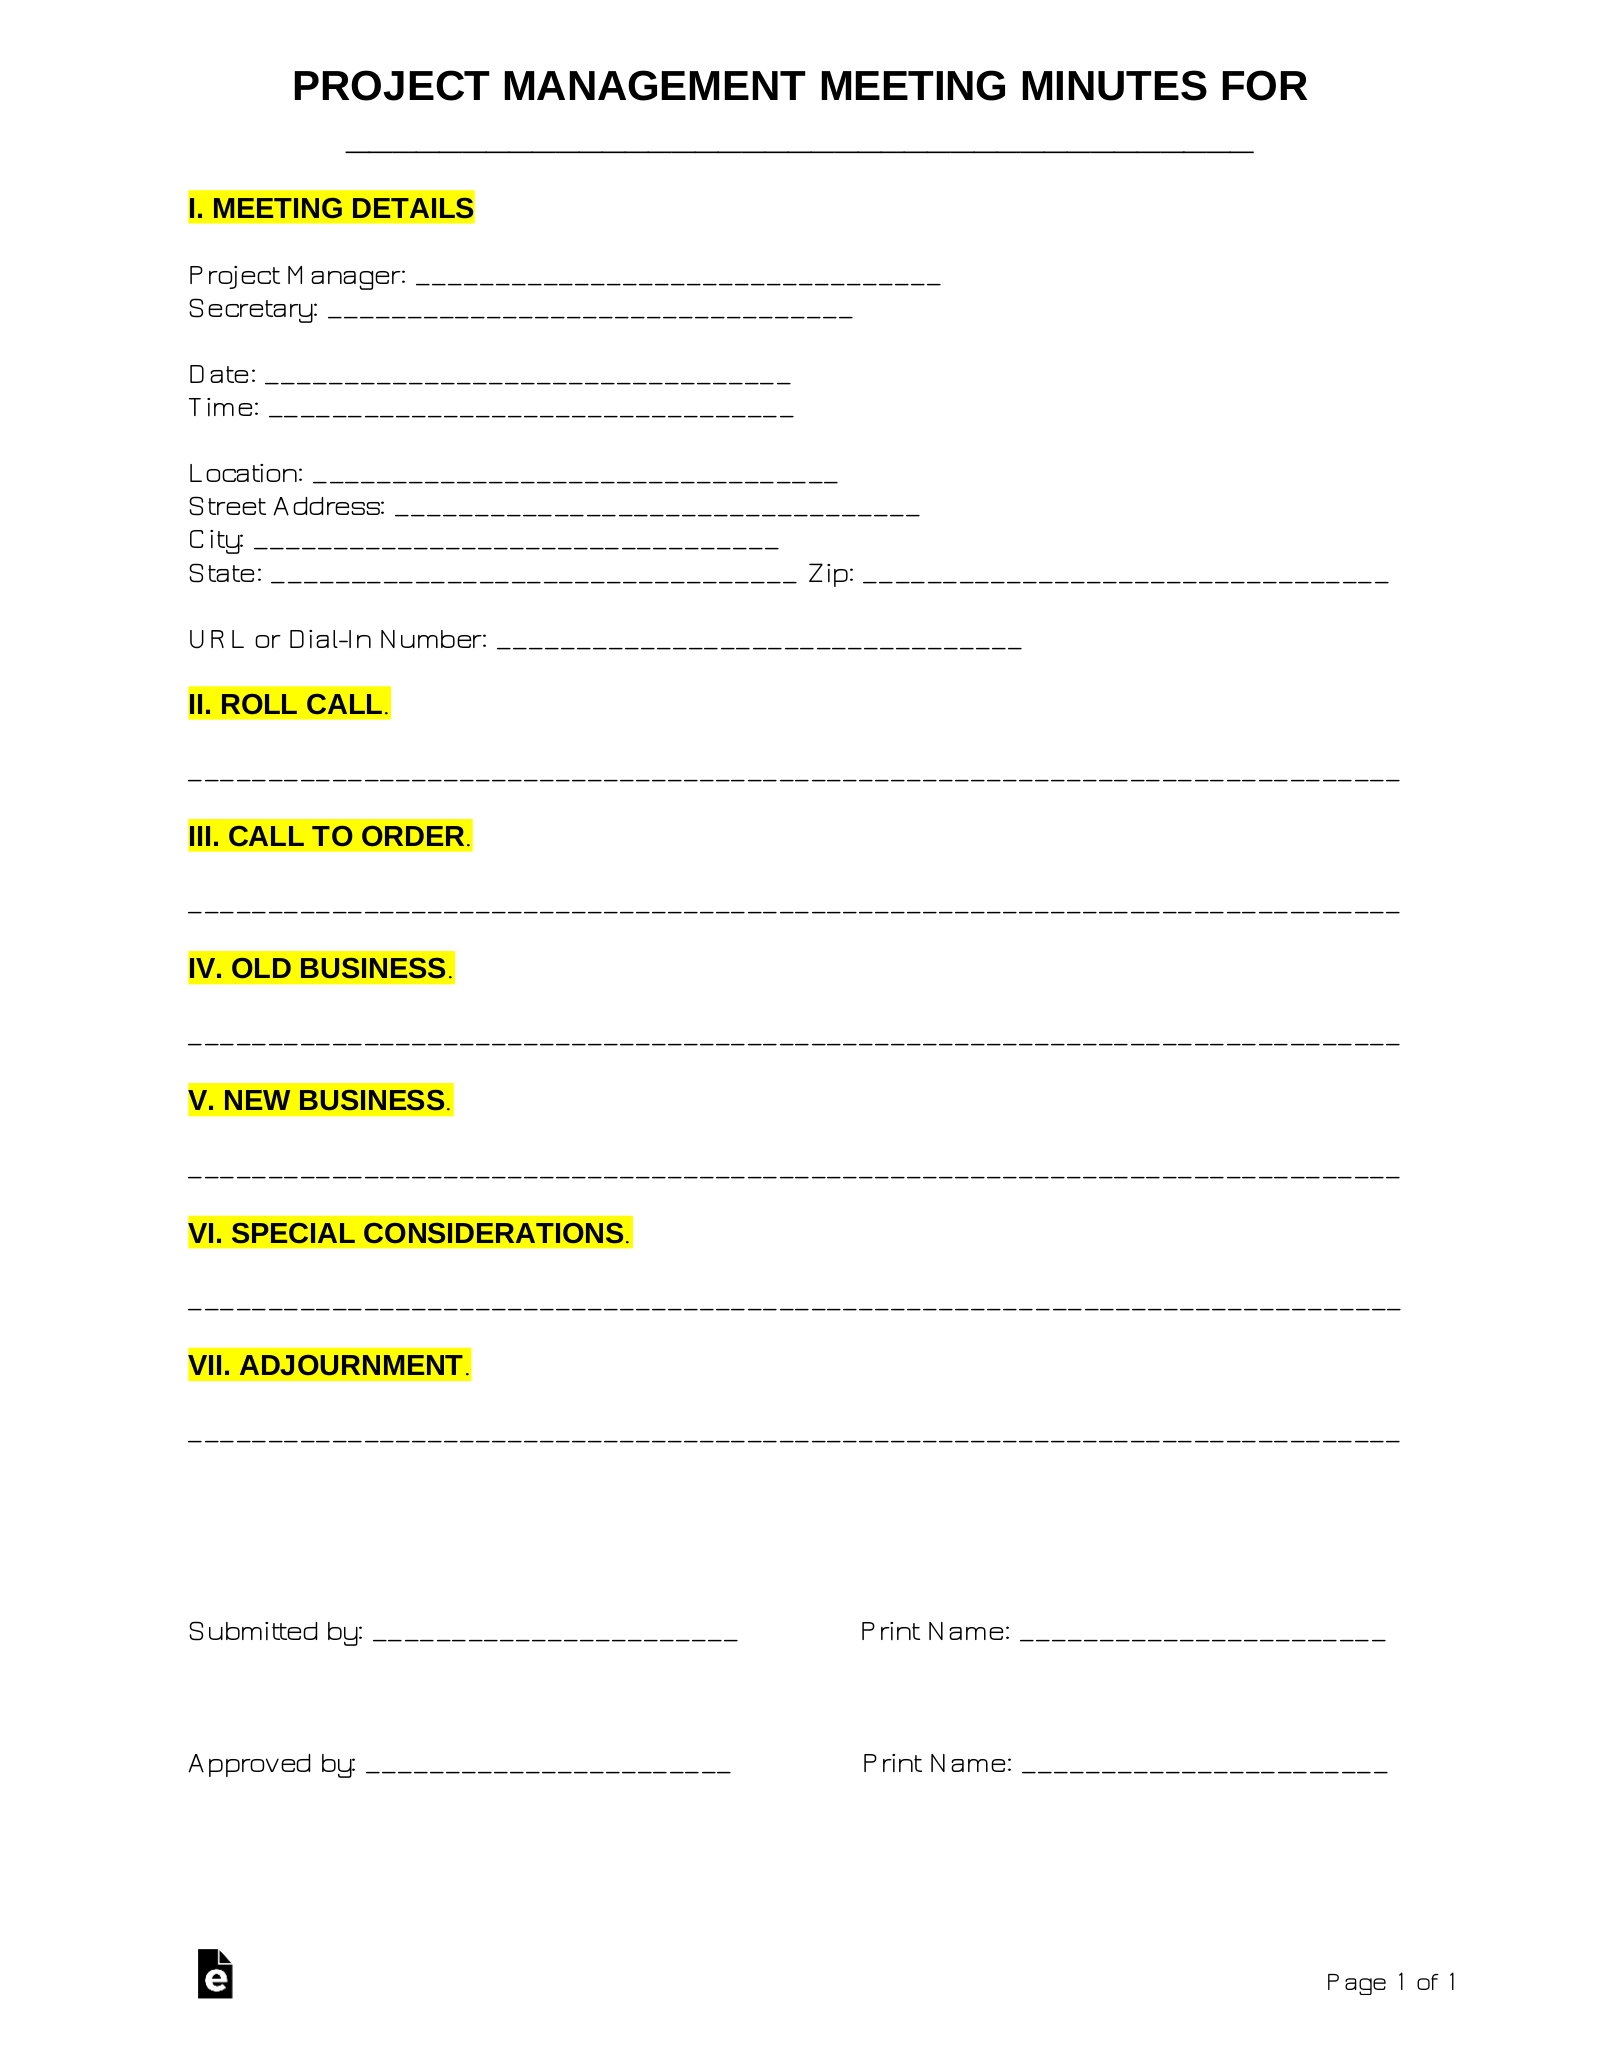 Free Project Management Meeting Minutes Template Sample PDF Word